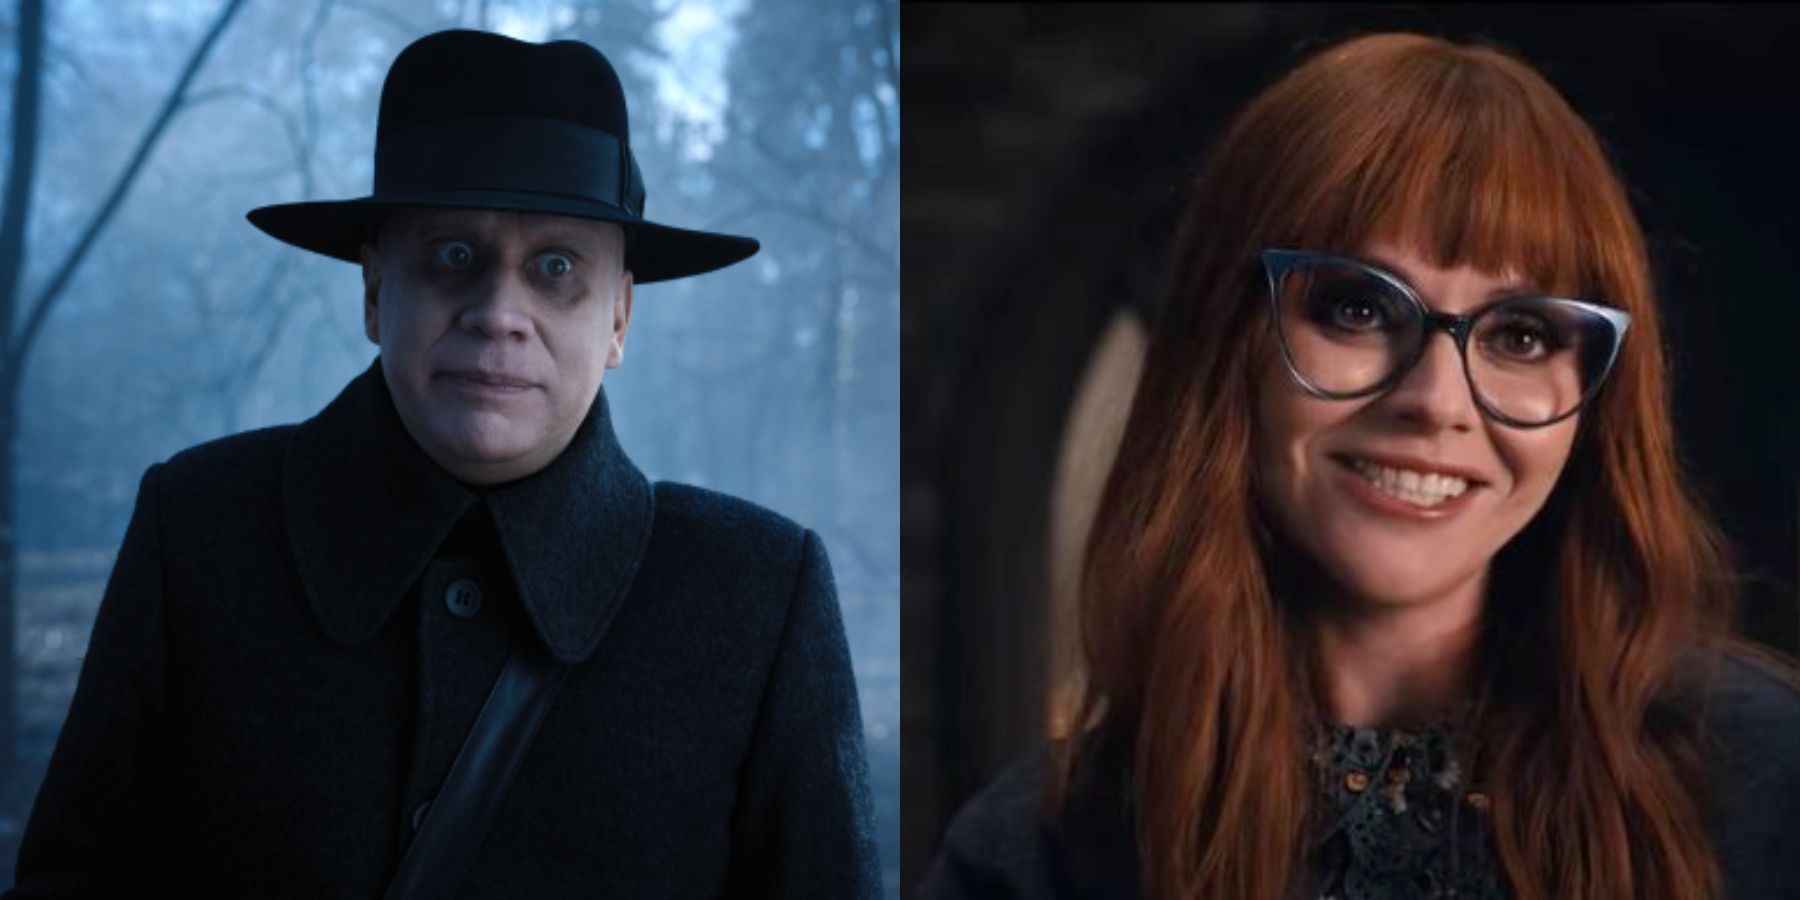 New Wednesday Trailer Reveals Fred Armisen as Uncle Fester,
Christina Ricci